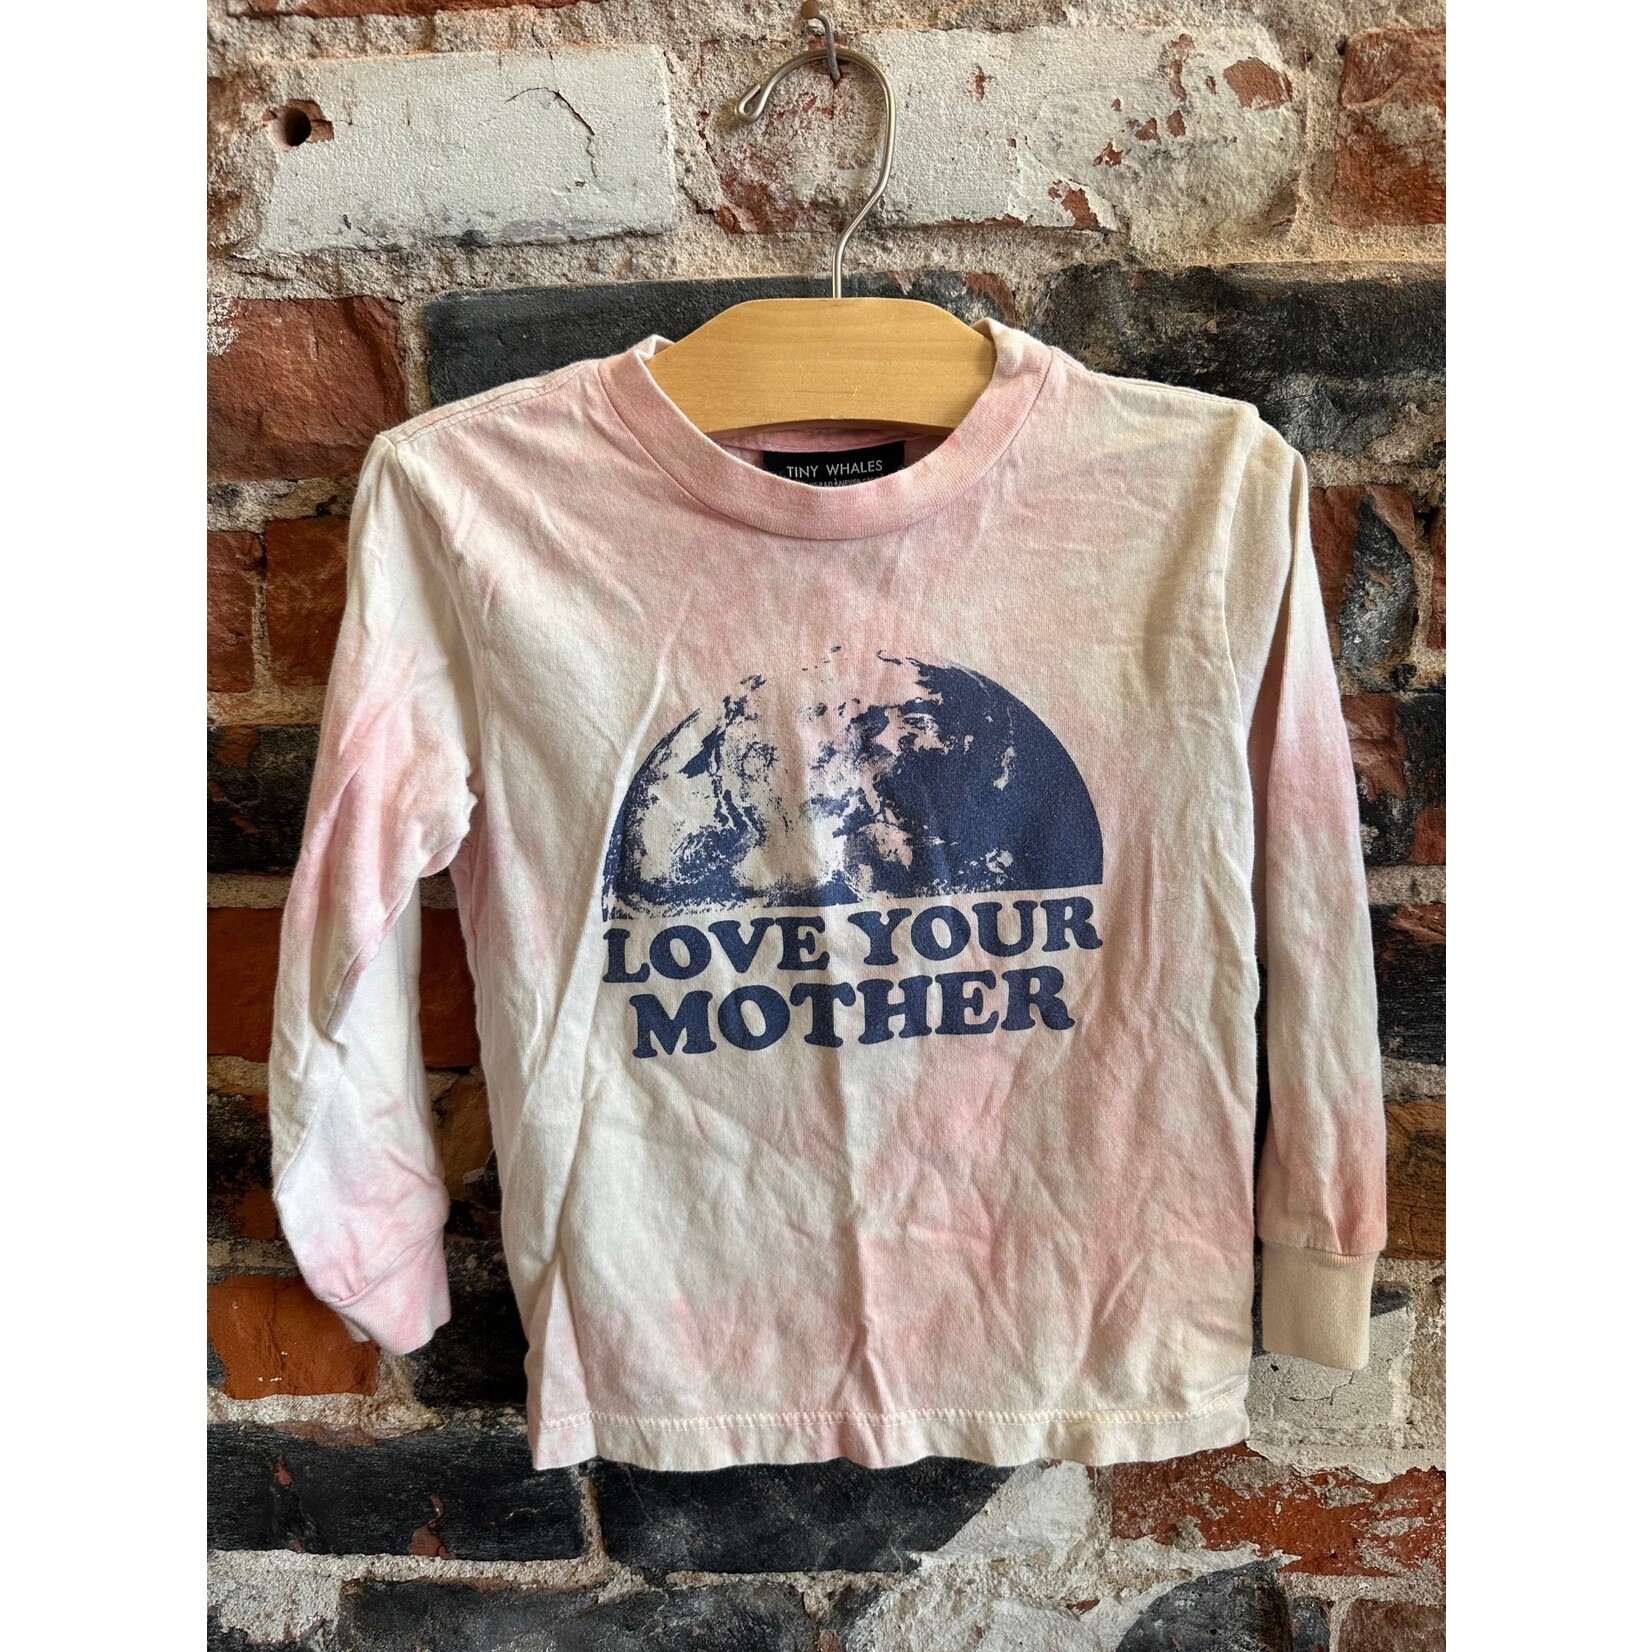 tiny whales tiny whales love your mother tee - 2 yr